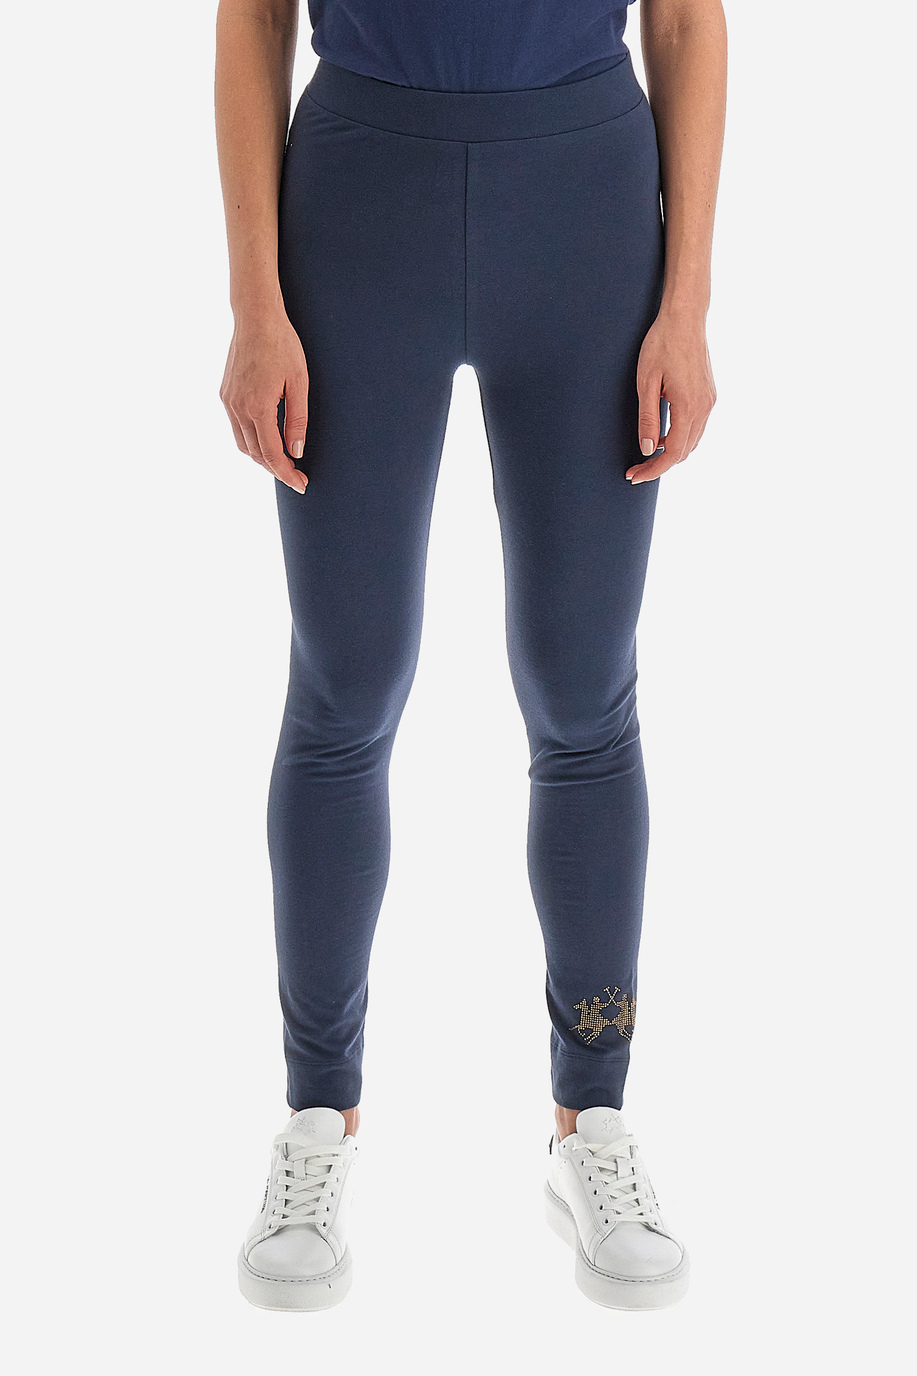 Solid color Polo Academy women's leggings with sequin logo - Vijay - Trousers | La Martina - Official Online Shop